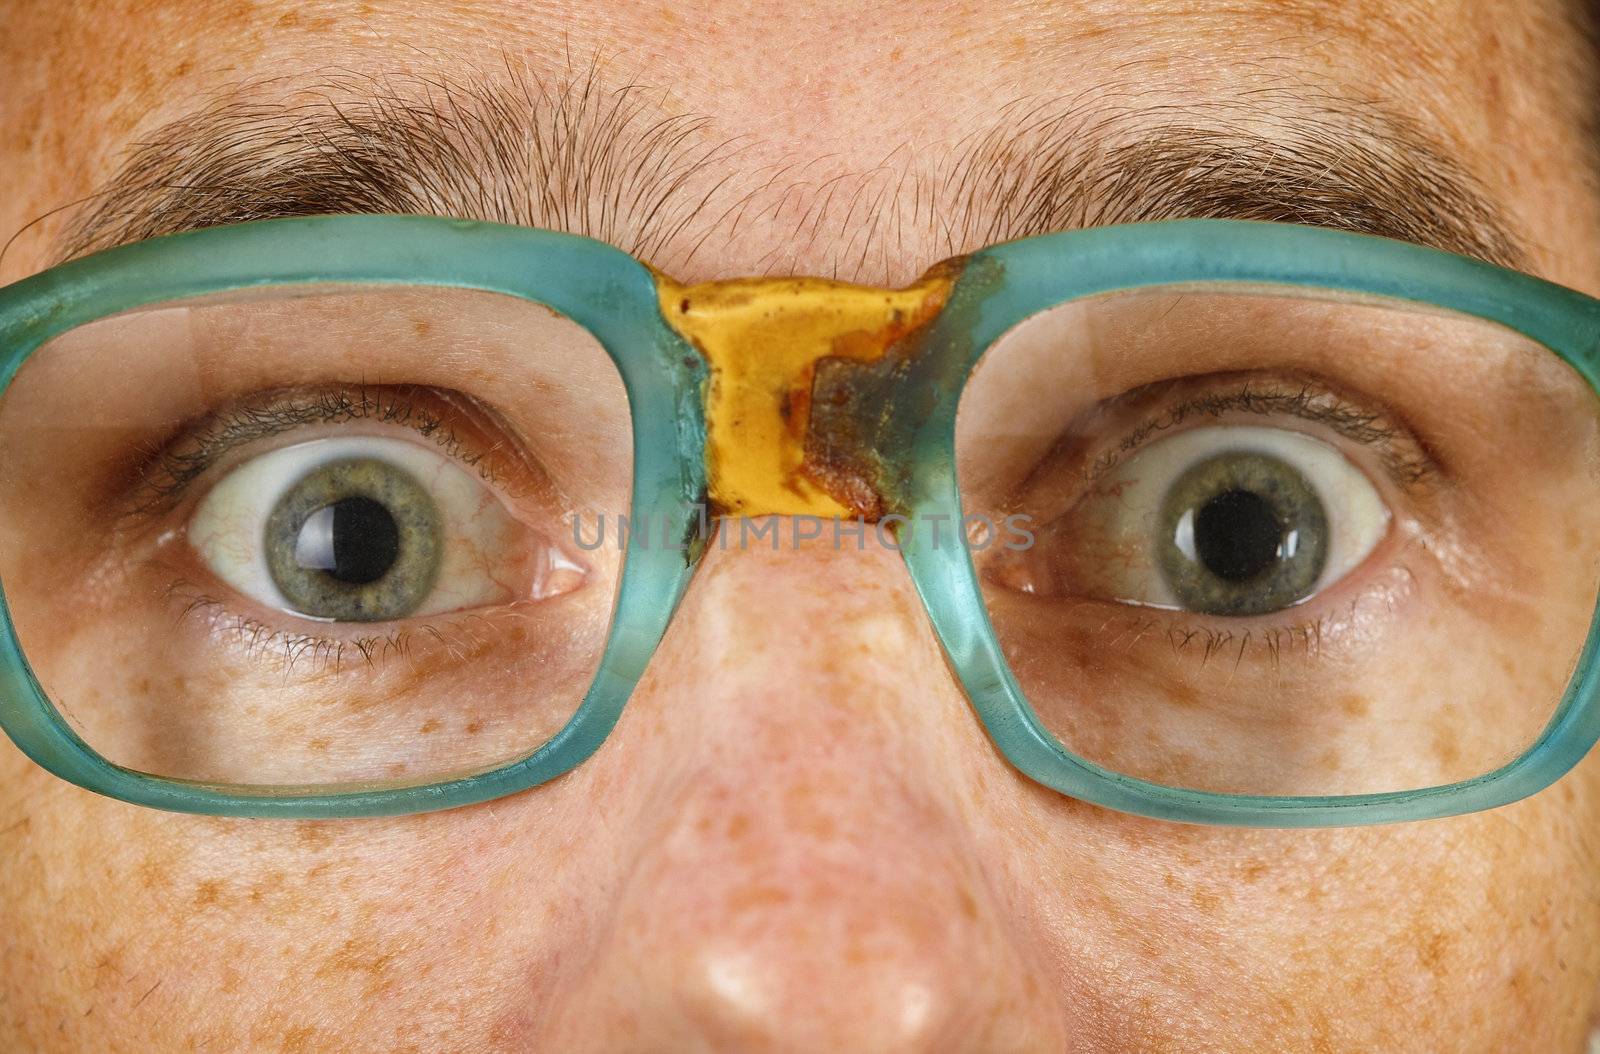 Eyes of the surprised person in old spectacles close up